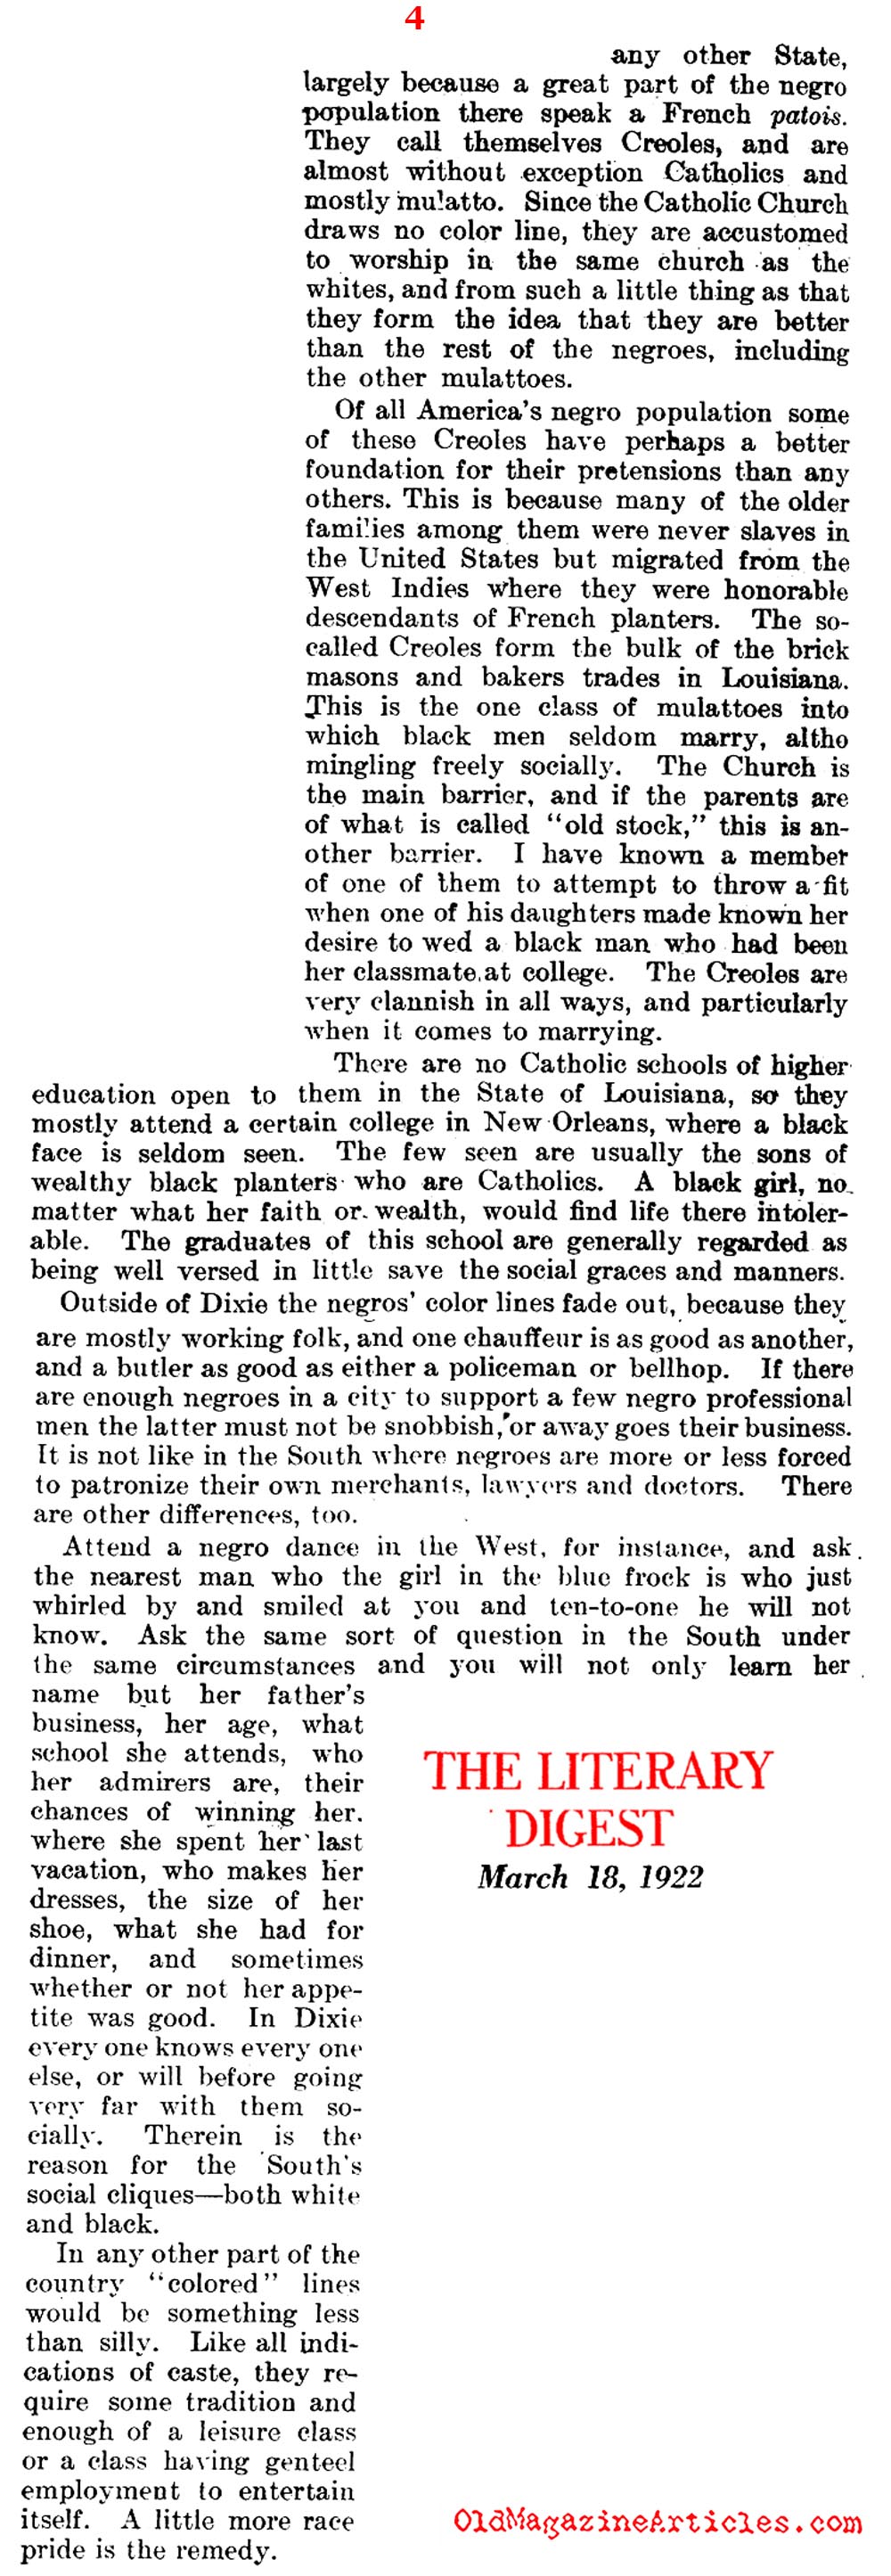 Social Differences Among the Lighter Skinned and Darker Skinned Blacks (Literary Digest, 1922)